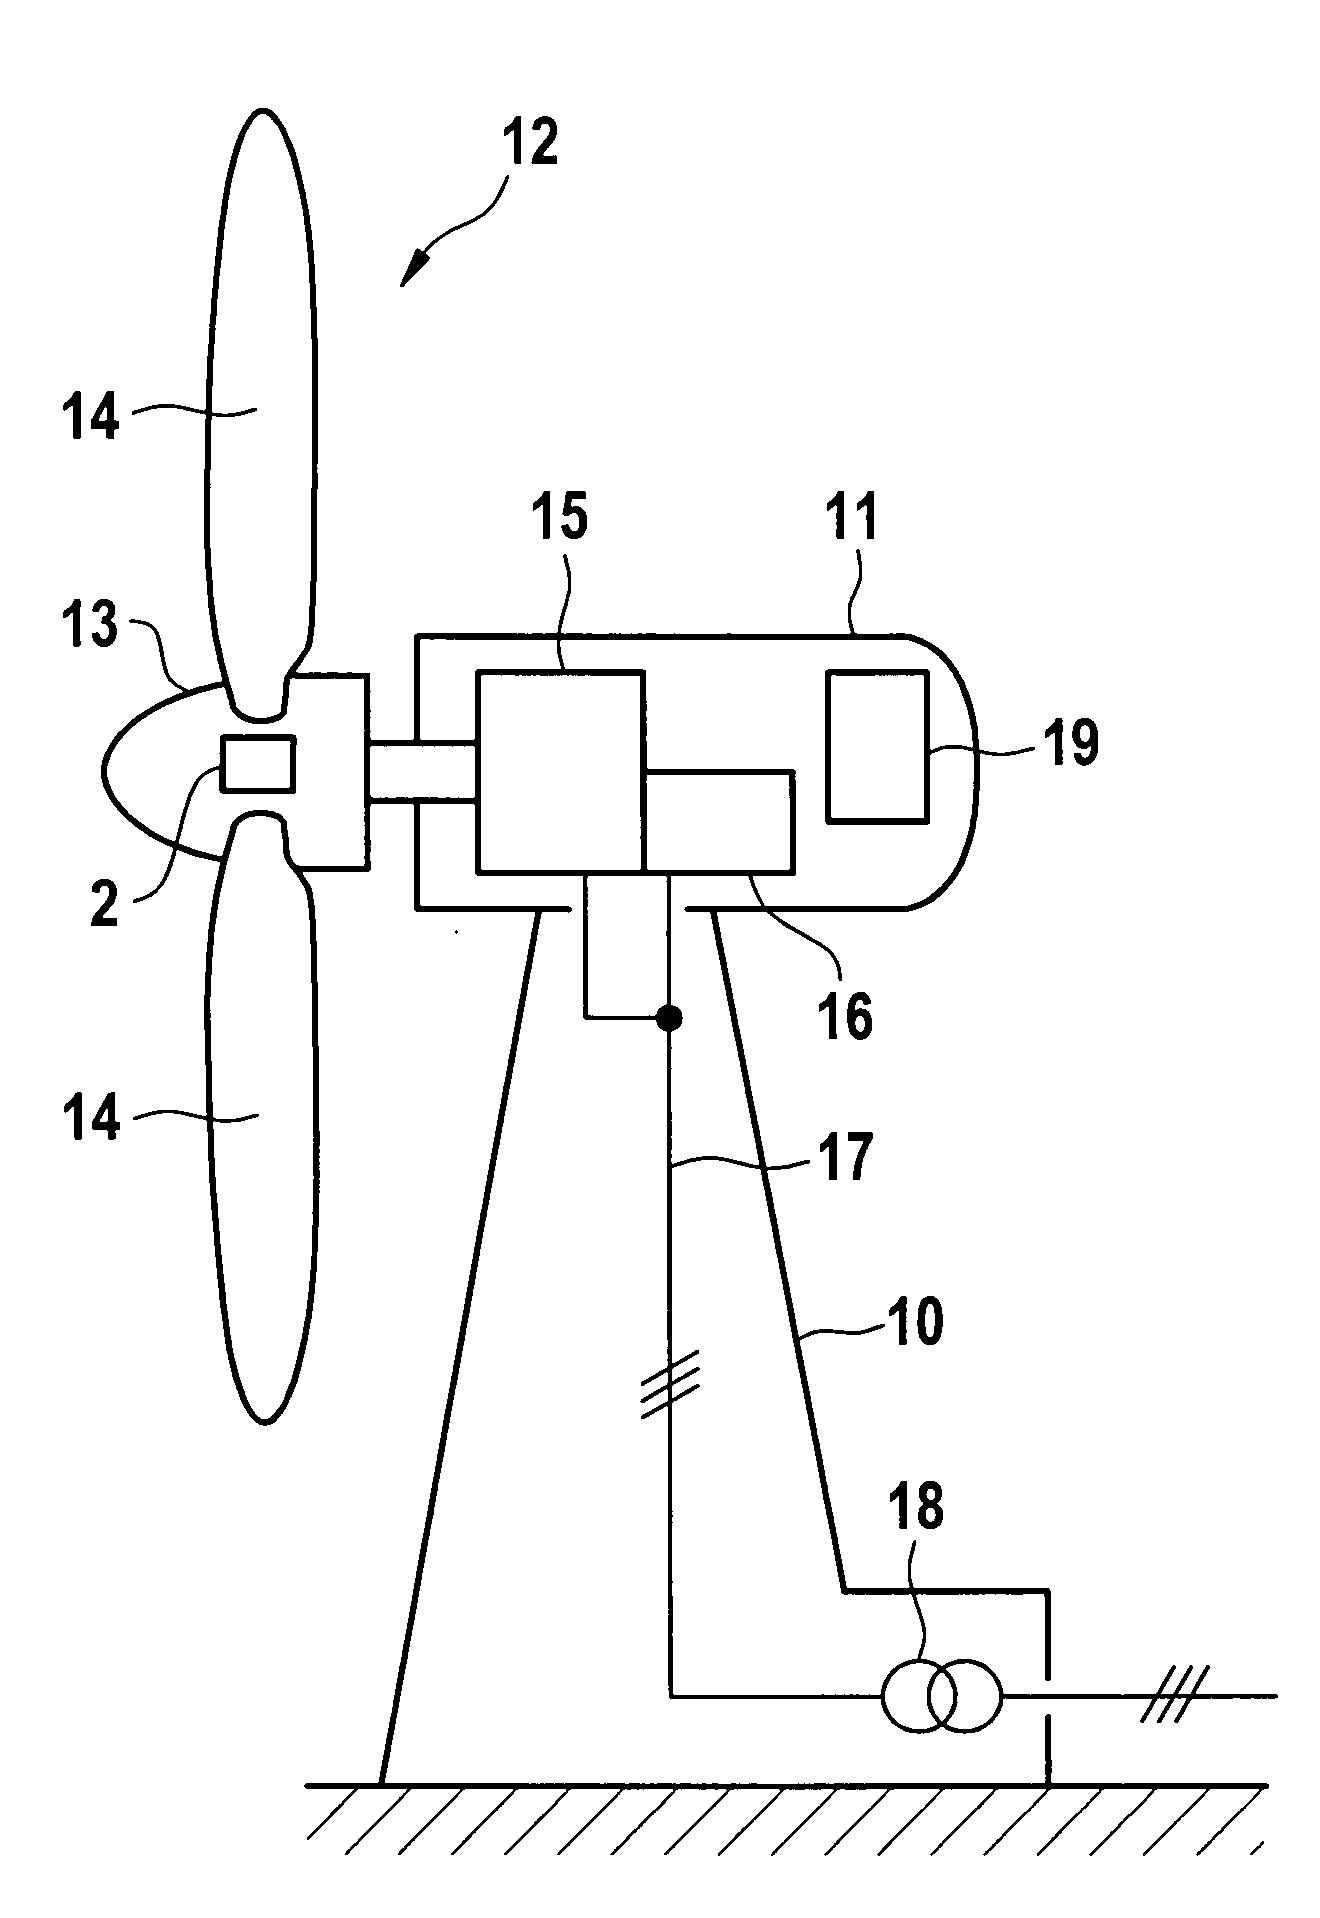 Monitoring device for pitch systems of wind energy systems